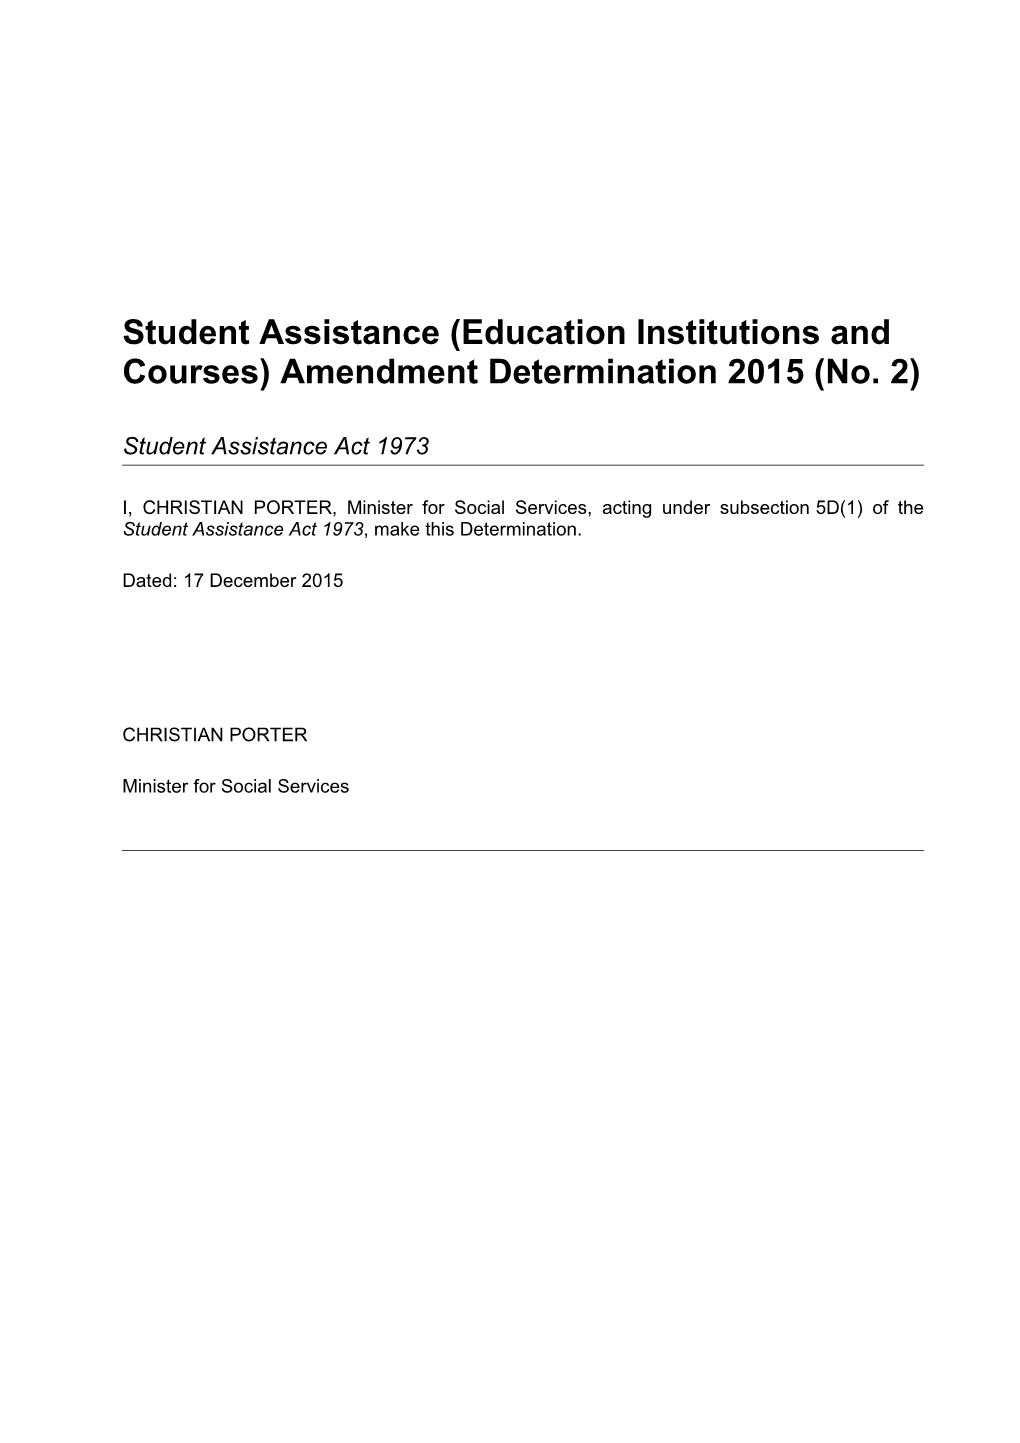 Student Assistance (Education Institutions and Courses) Amendment Determination 2015(No. 2)